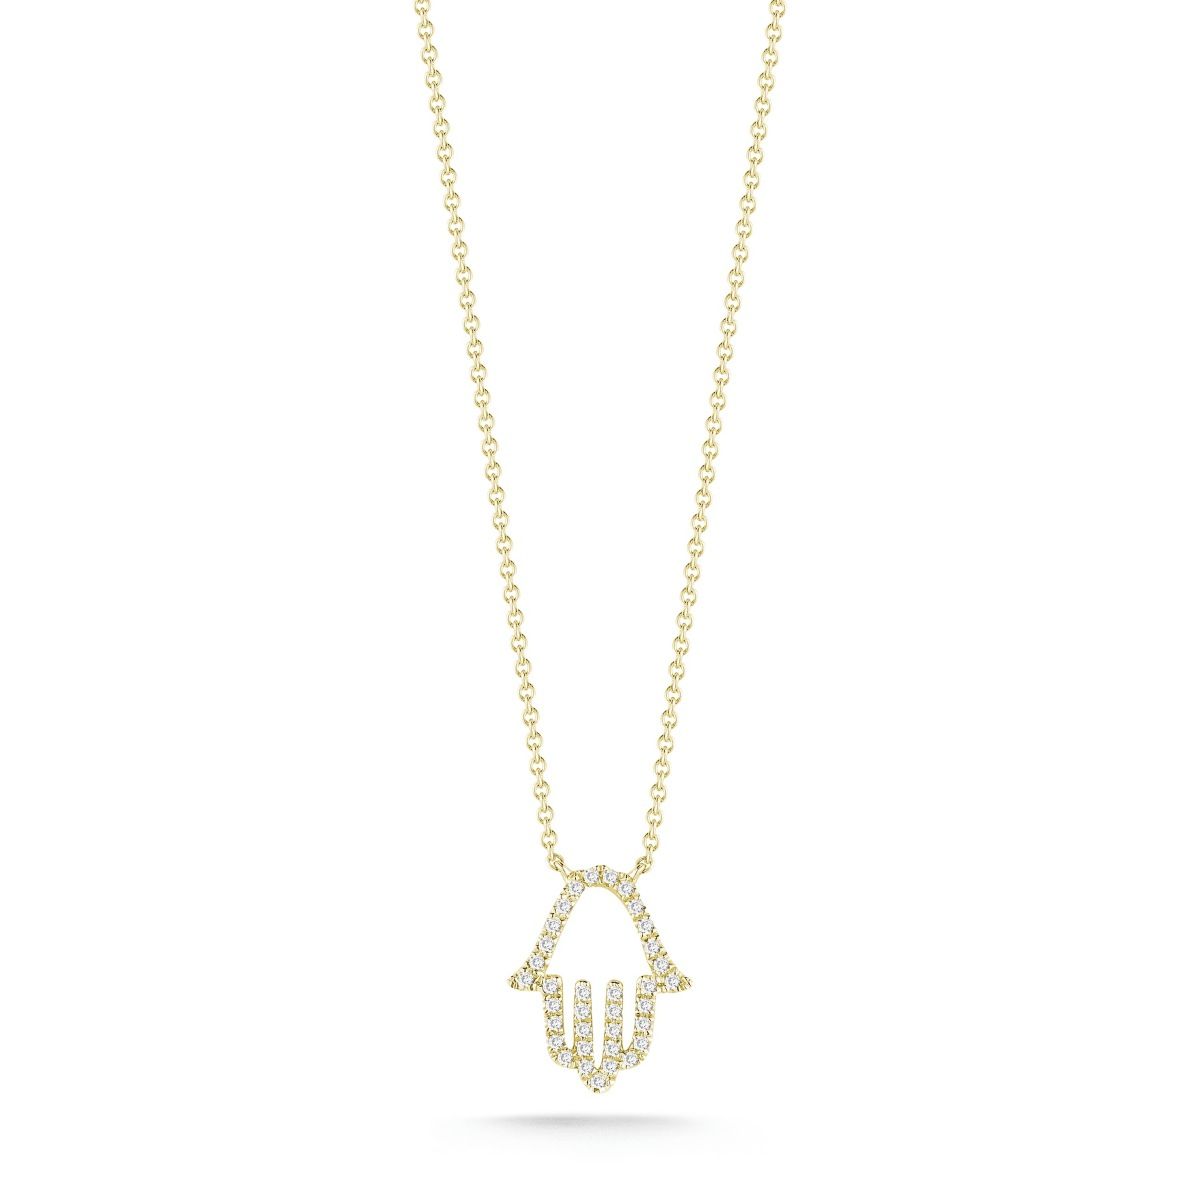 Solid Pave Hamsa Necklace Jewelry for Women YCN6891